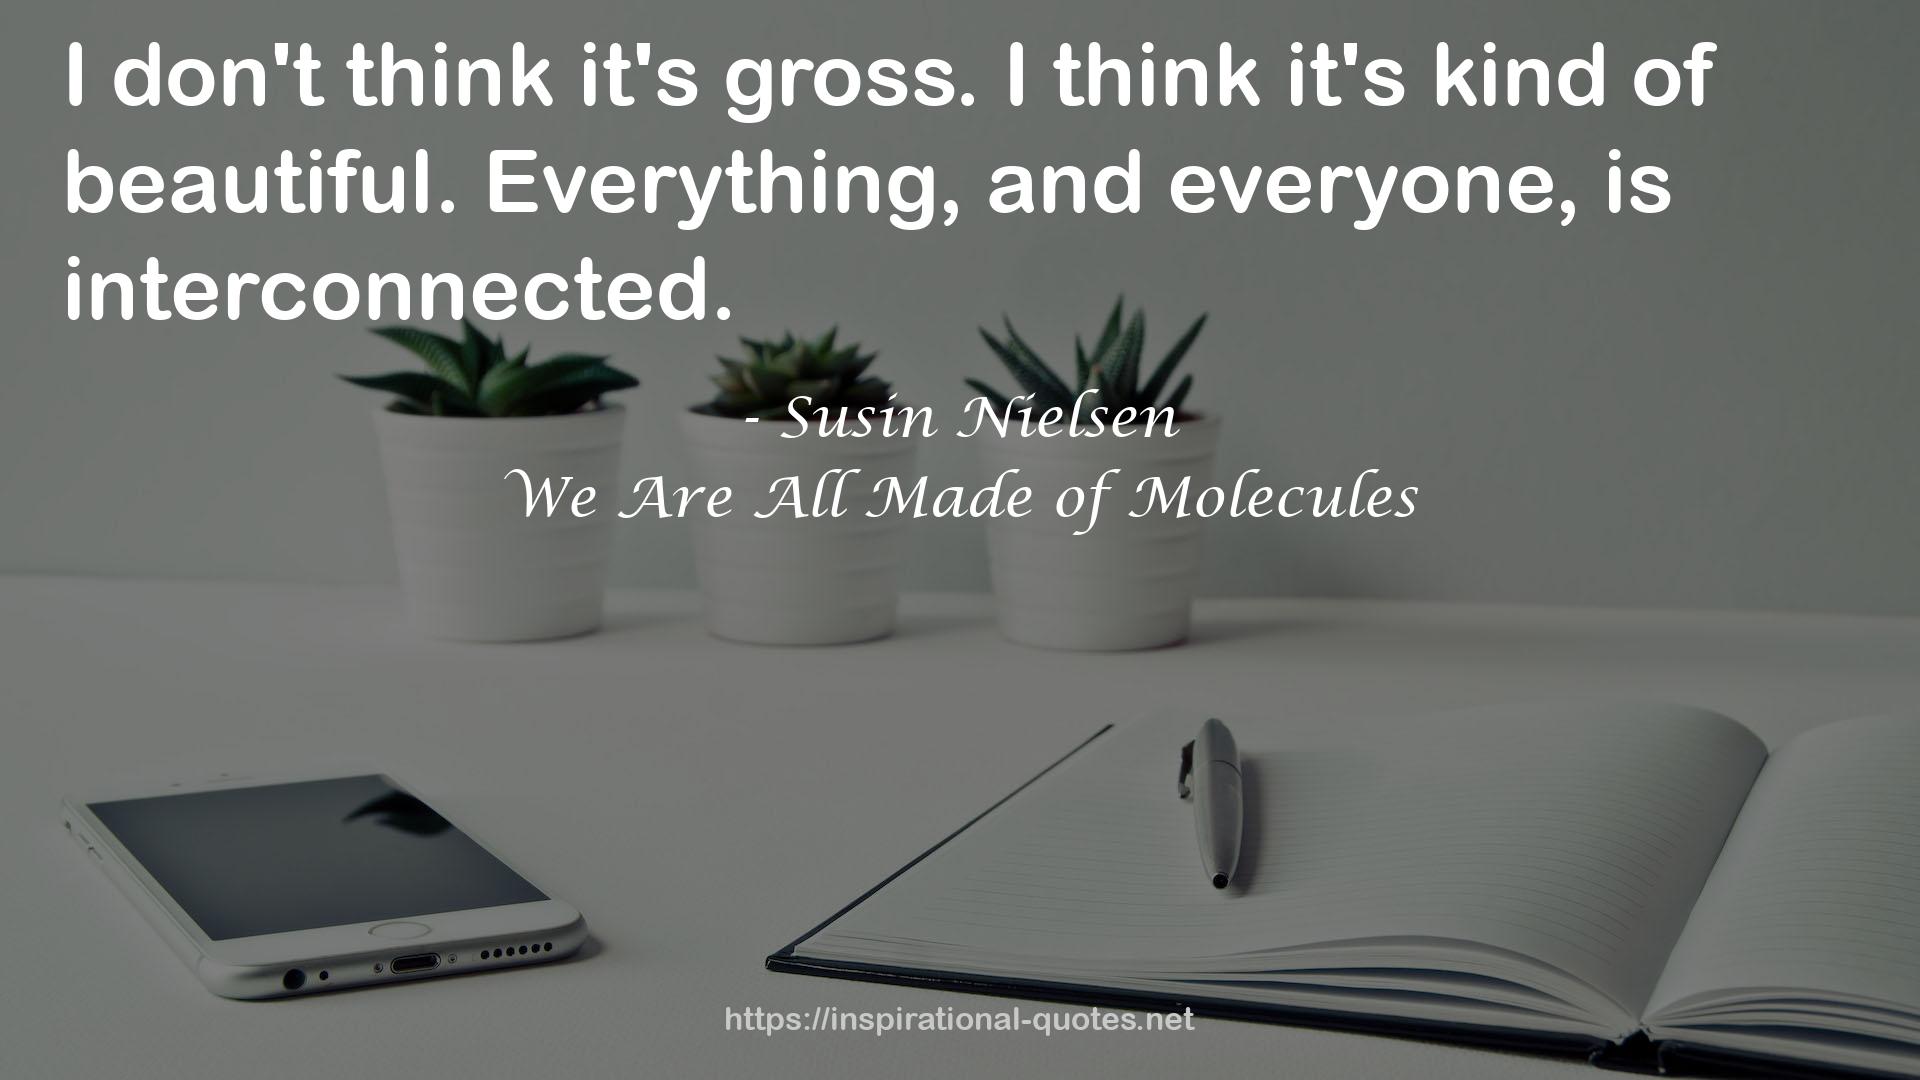 We Are All Made of Molecules QUOTES